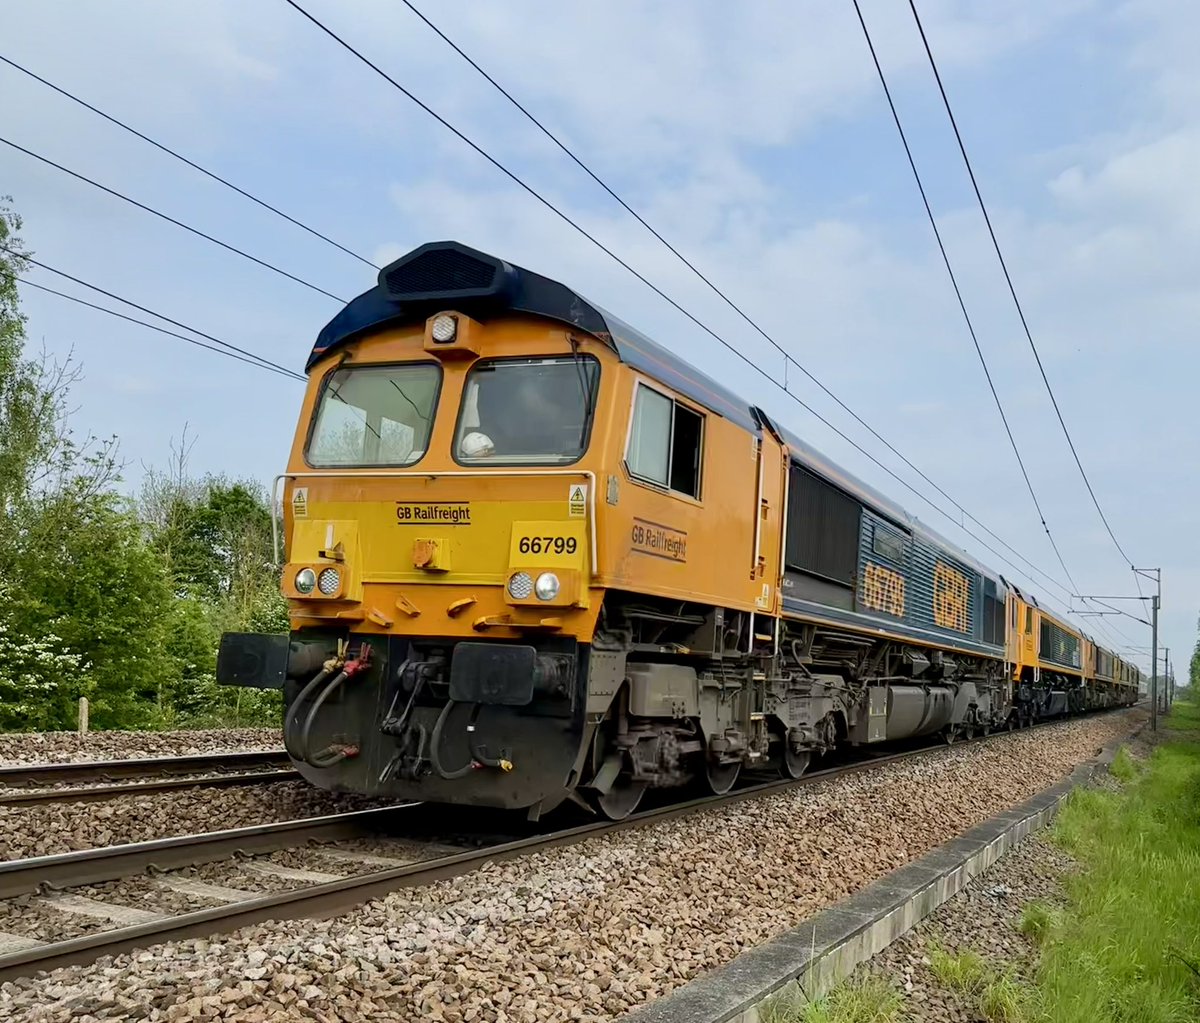 66799/737/768/713/767 at Crofton on todays 0G90 Doncaster - Crewe #class66